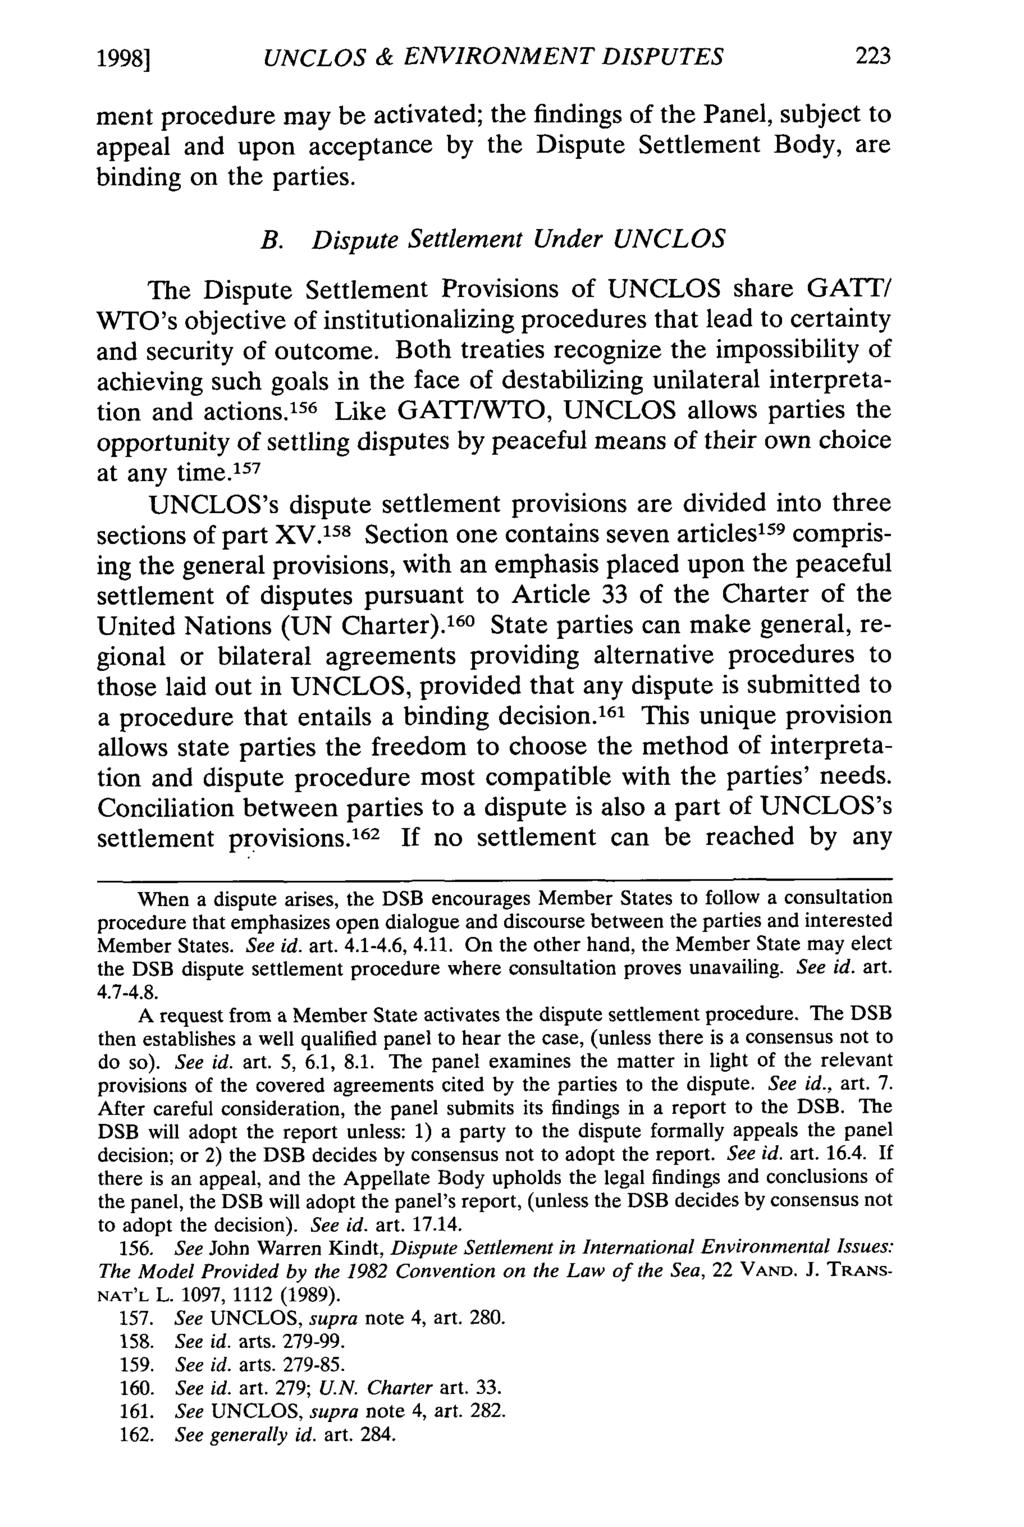 19981 UNCLOS & ENVIRONMENT DISPUTES ment procedure may be activated; the findings of the Panel, subject to appeal and upon acceptance by the Dispute Settlement Bo